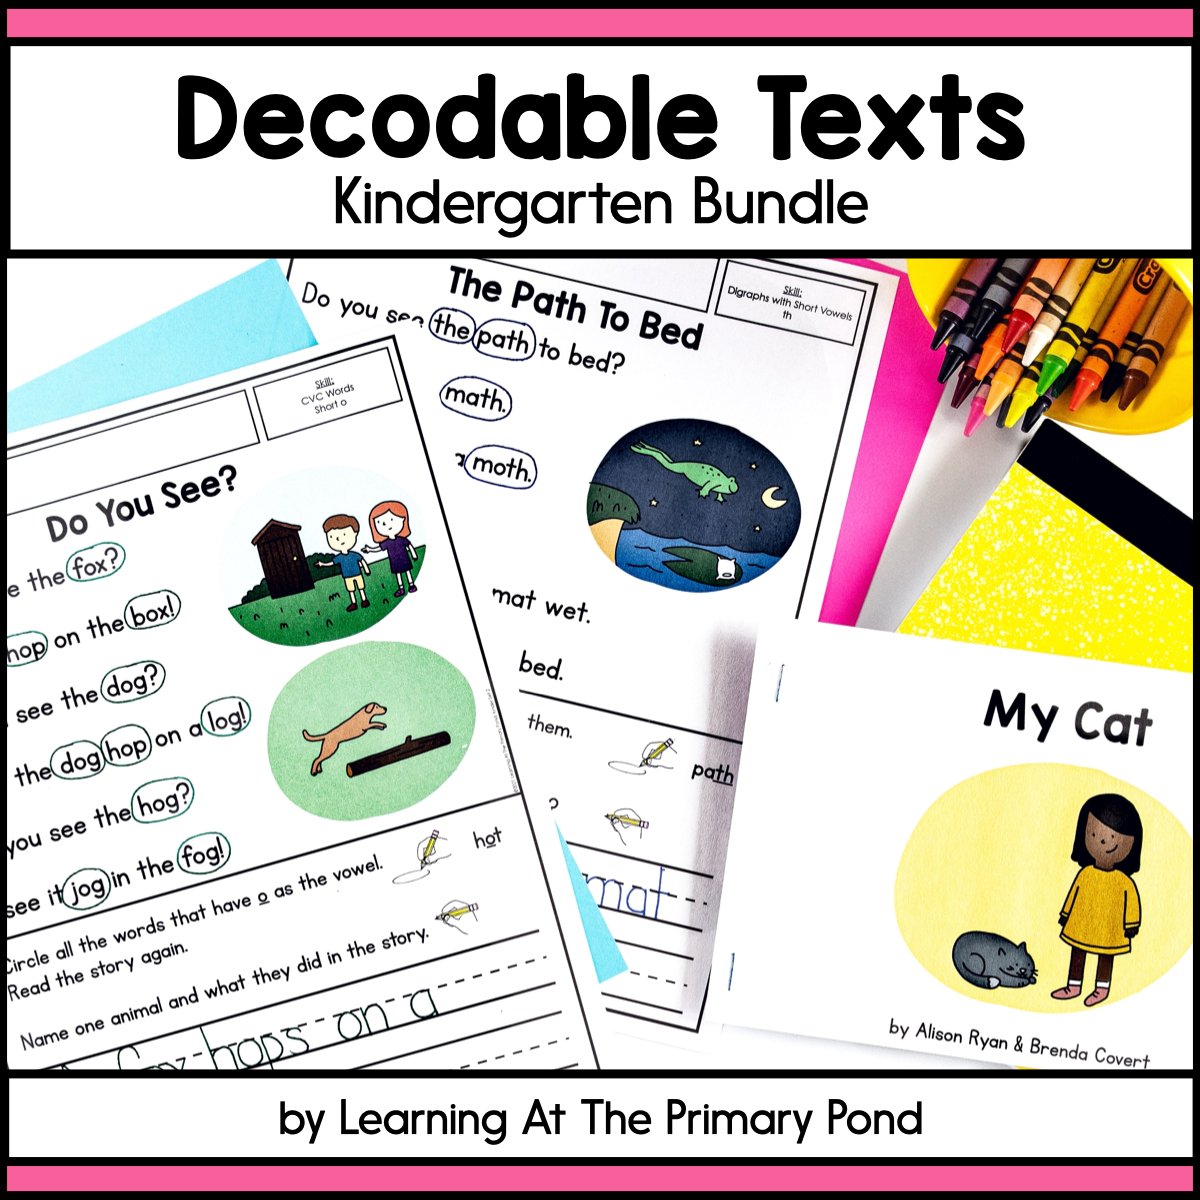 Decodable Readers / Texts: Kindergarten Bundle - learning-at-the-primary-pond